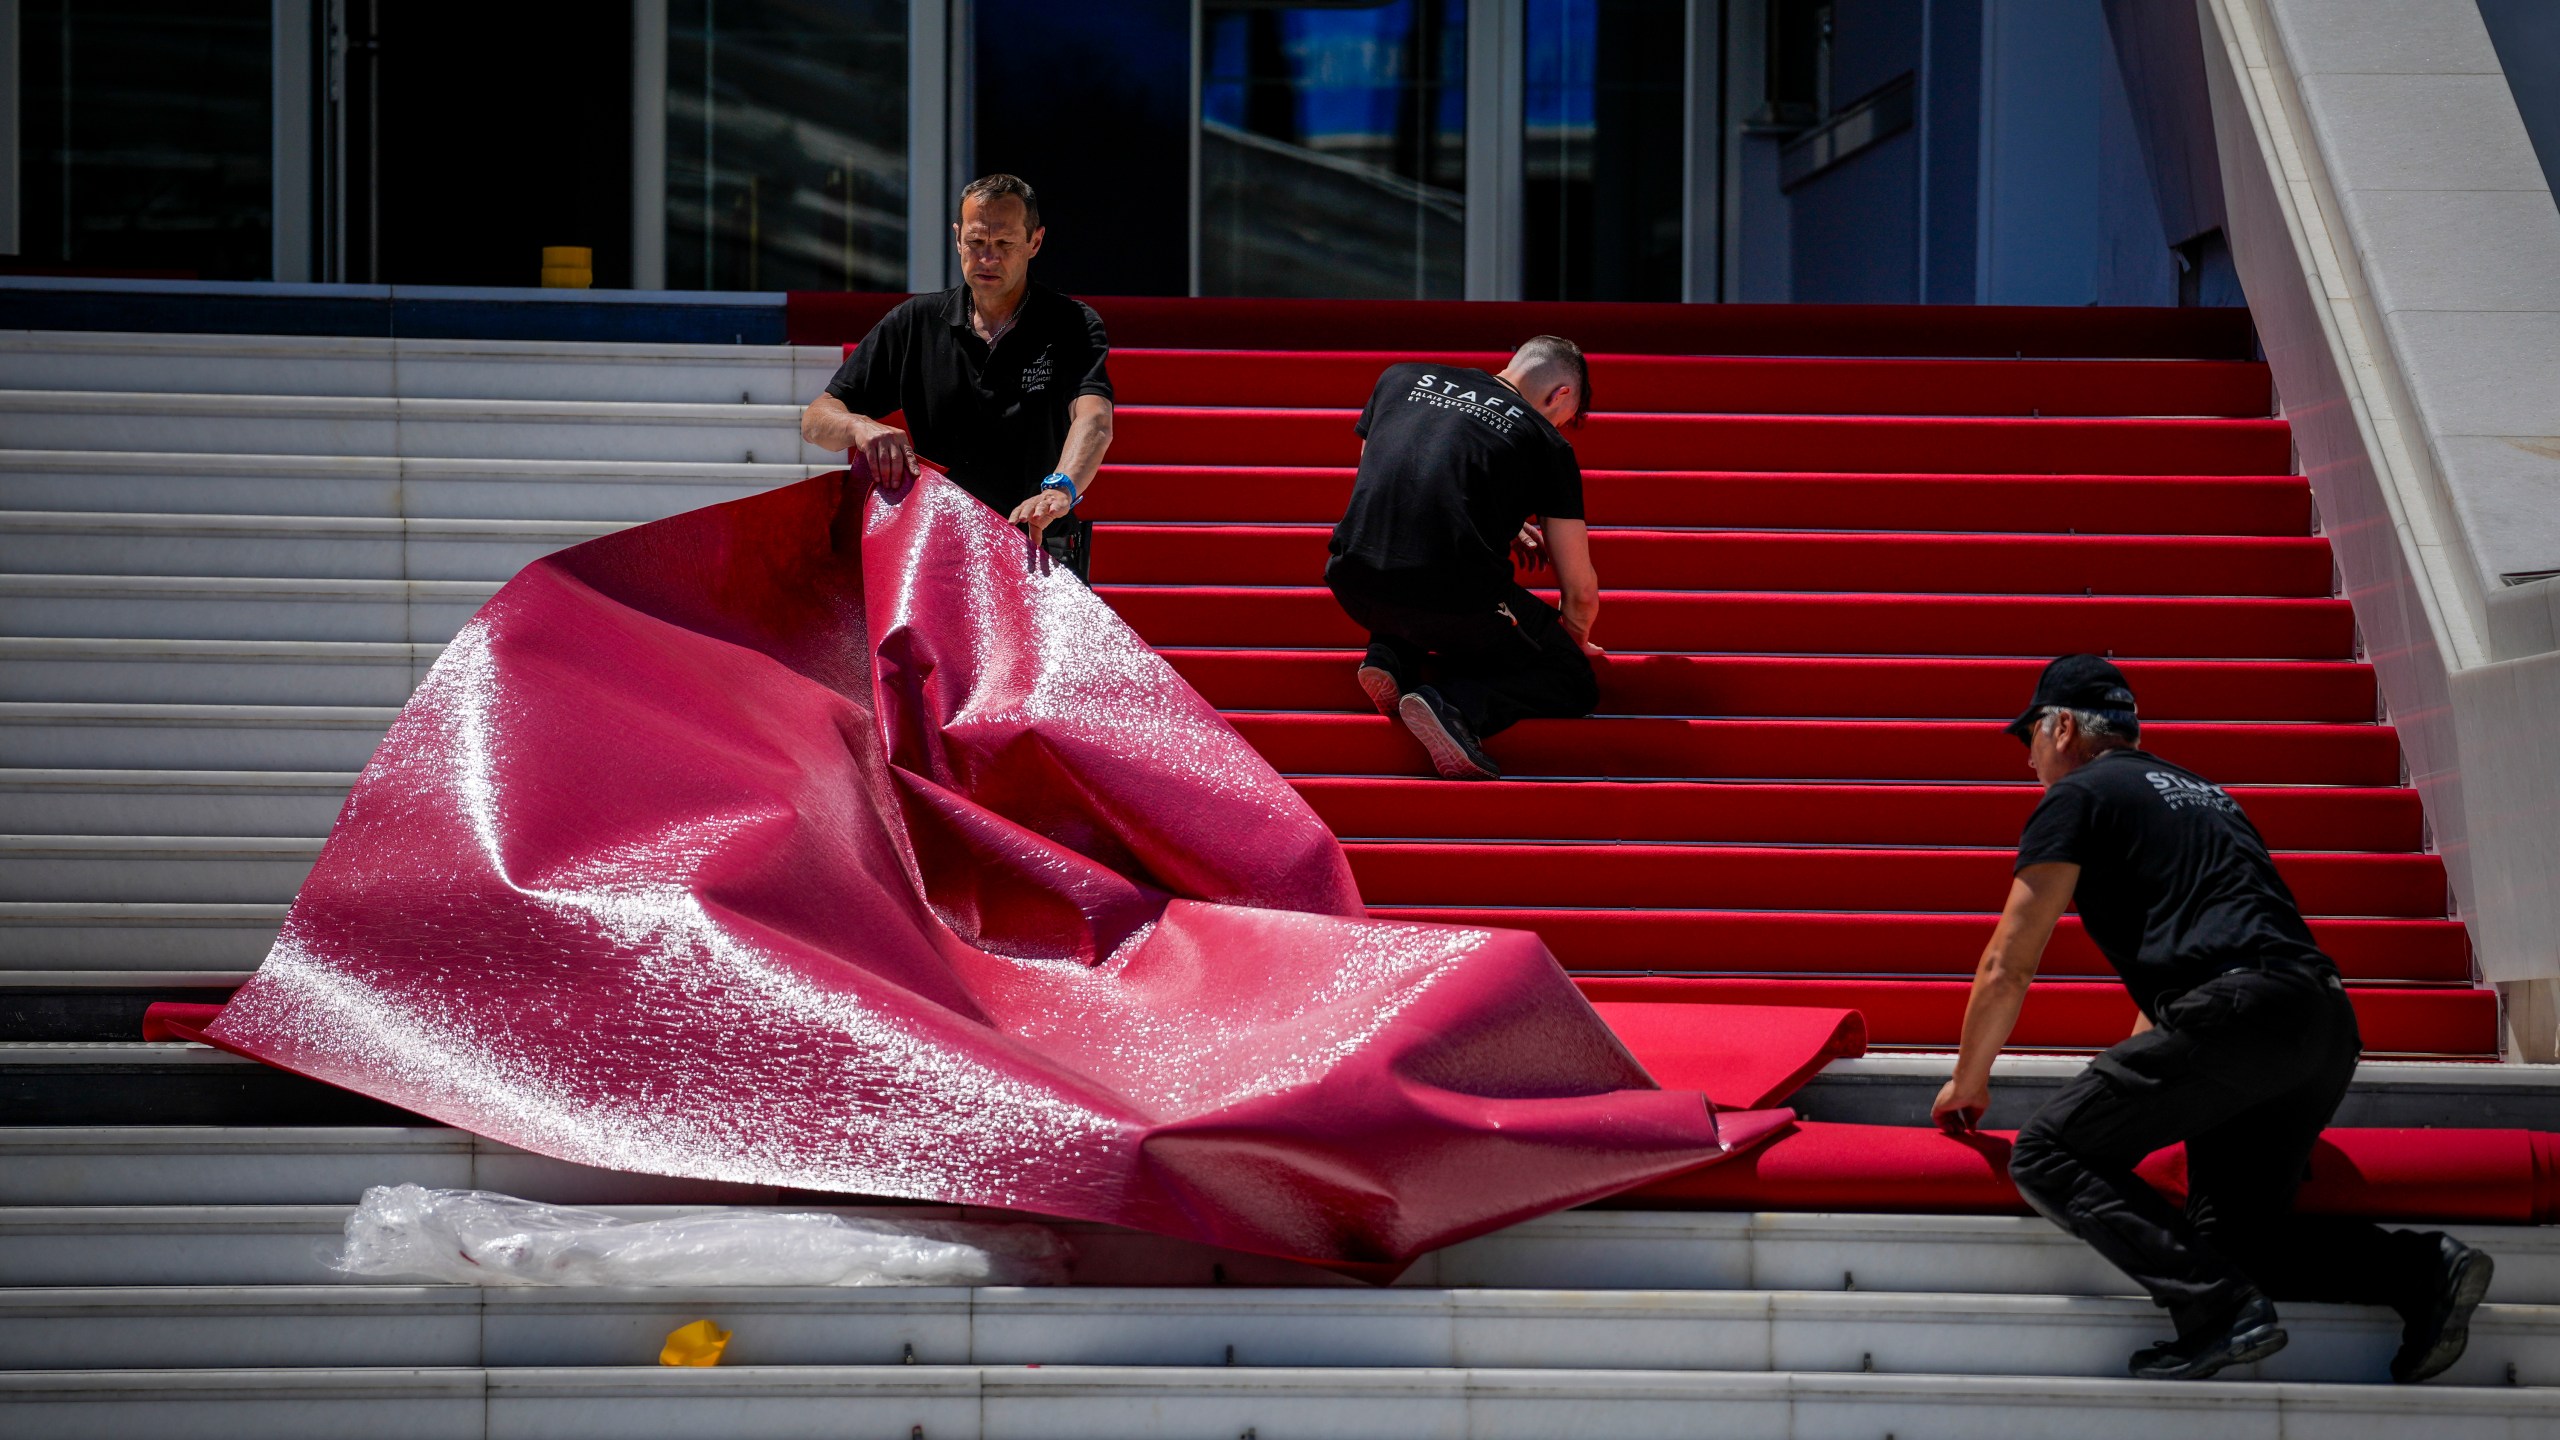 Festival workers prepare the red carpet during preparations for the 77th international film festival, Cannes, southern France, Monday, May 13, 2024. The Cannes film festival runs from May 14 until May 25, 2024. (AP Photo/Andreea Alexandru)